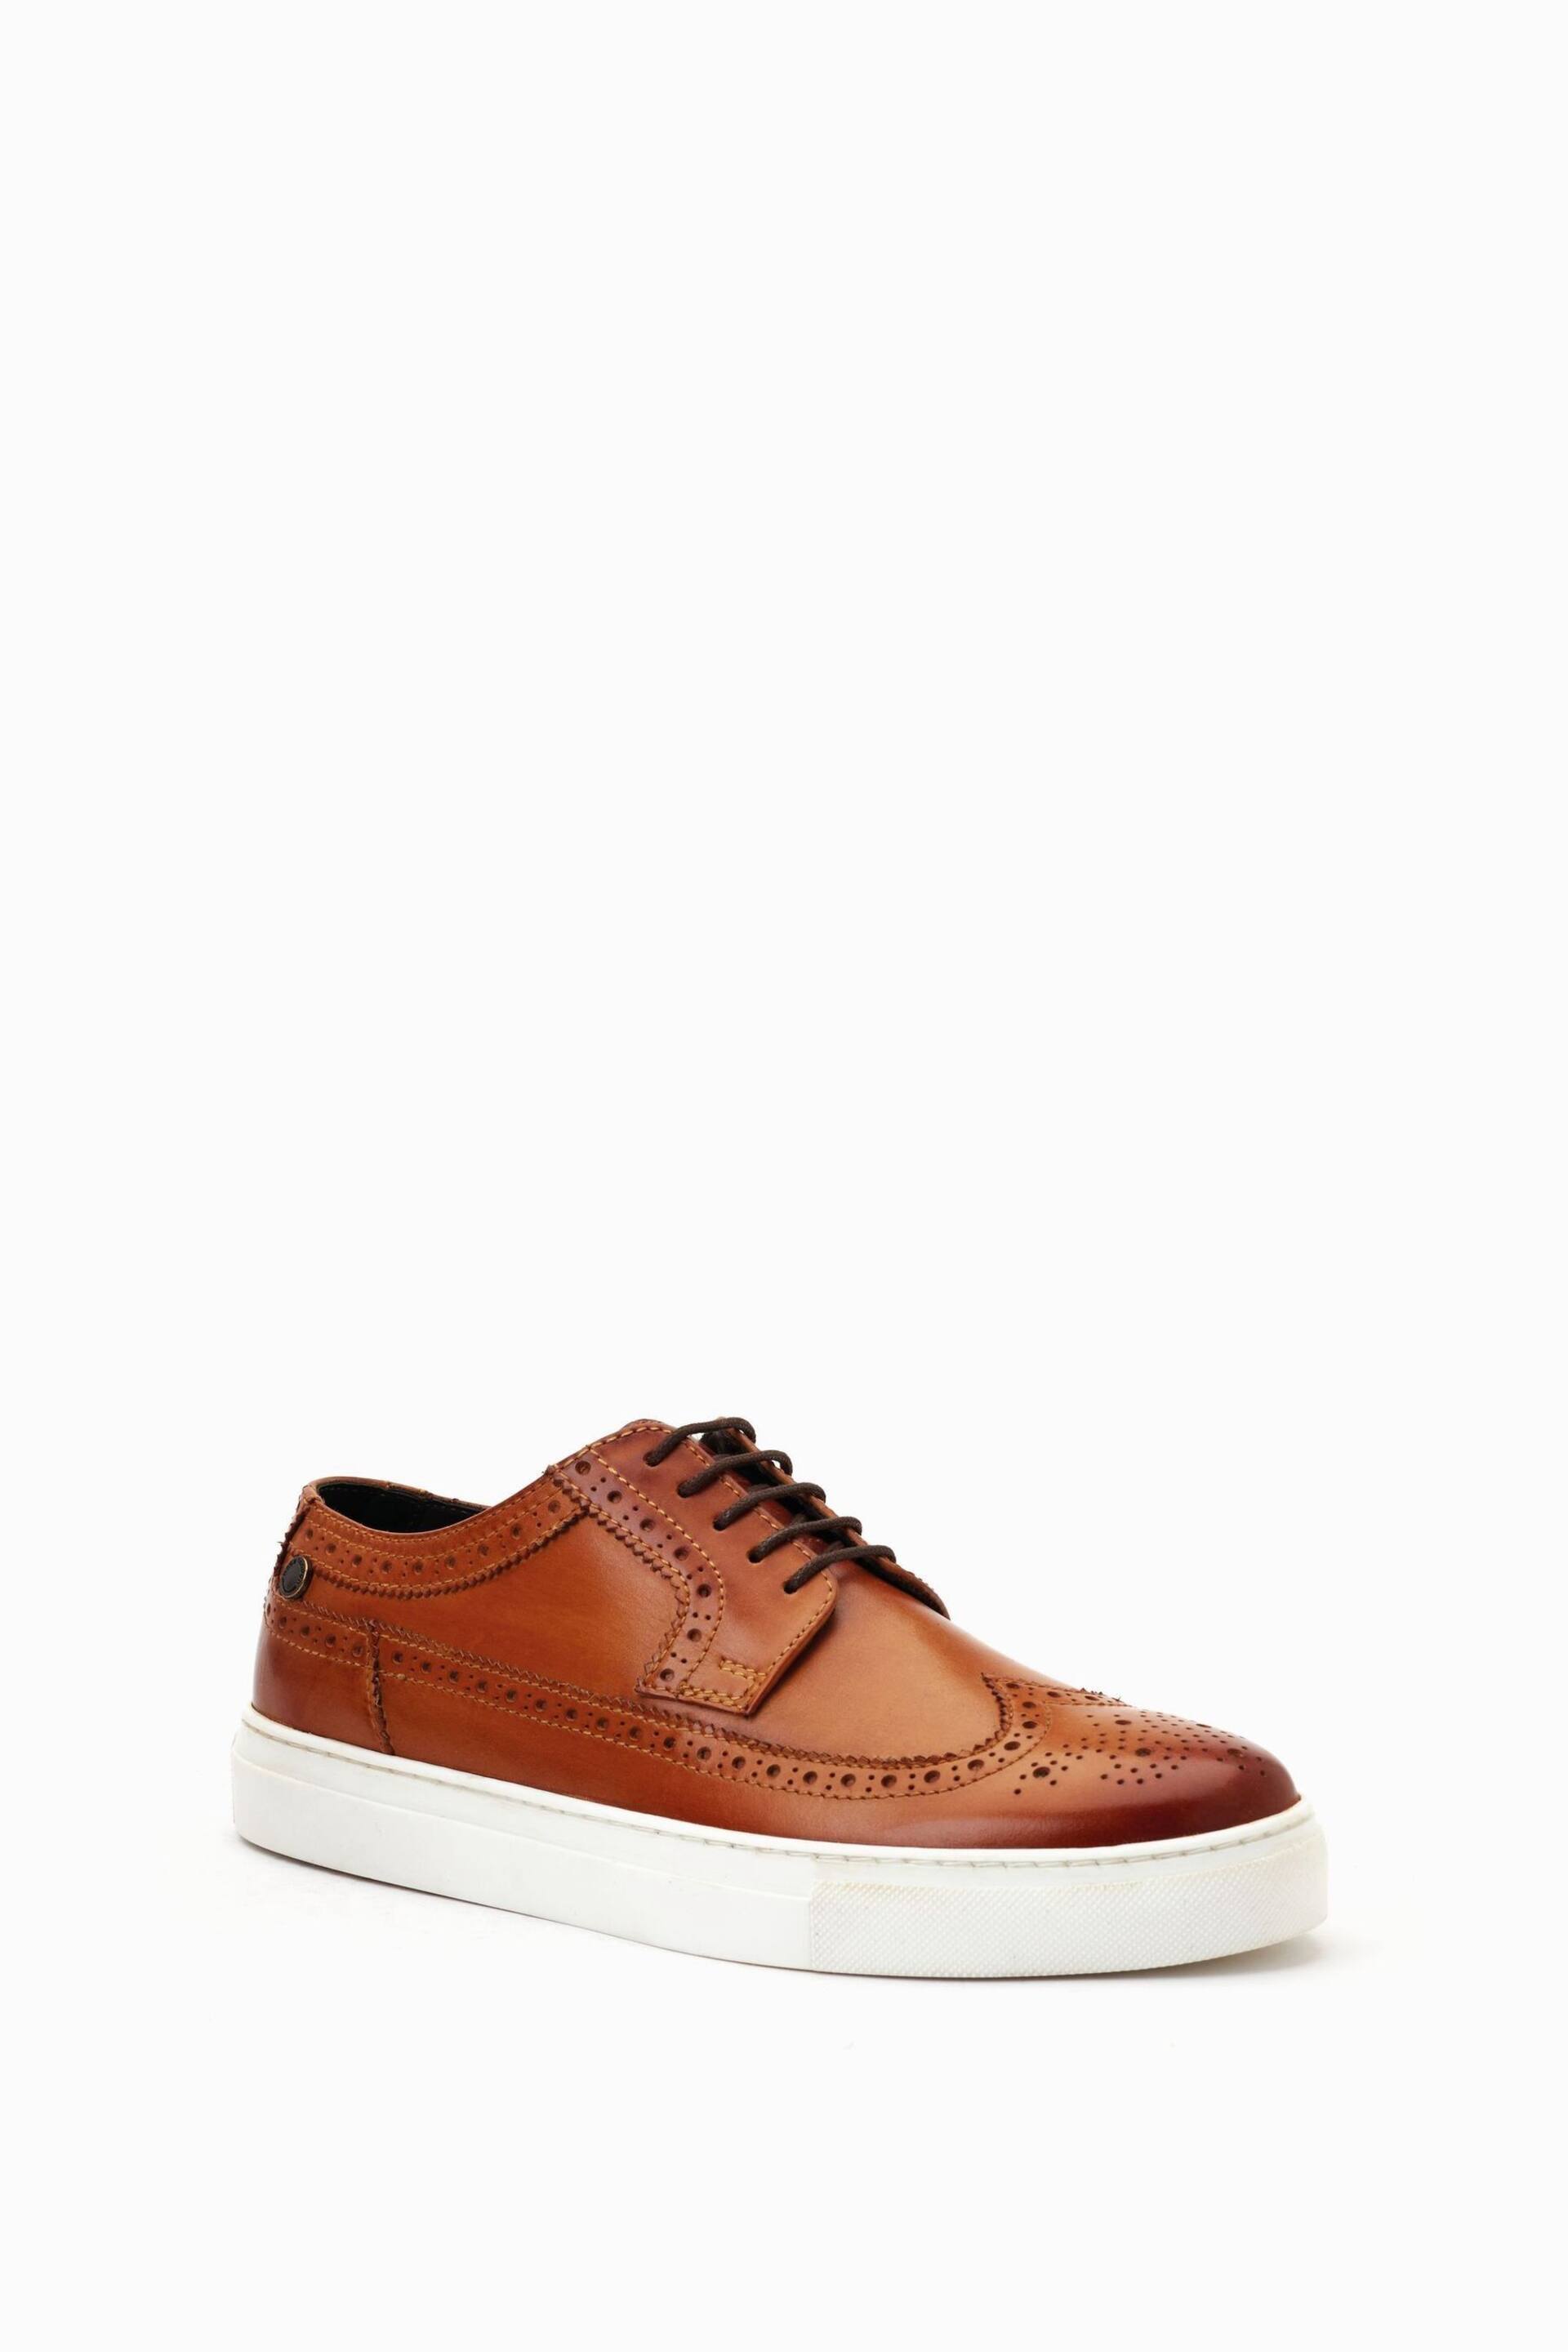 Base London Mickey Lace Up Brown Brogue Trainers - Image 2 of 6